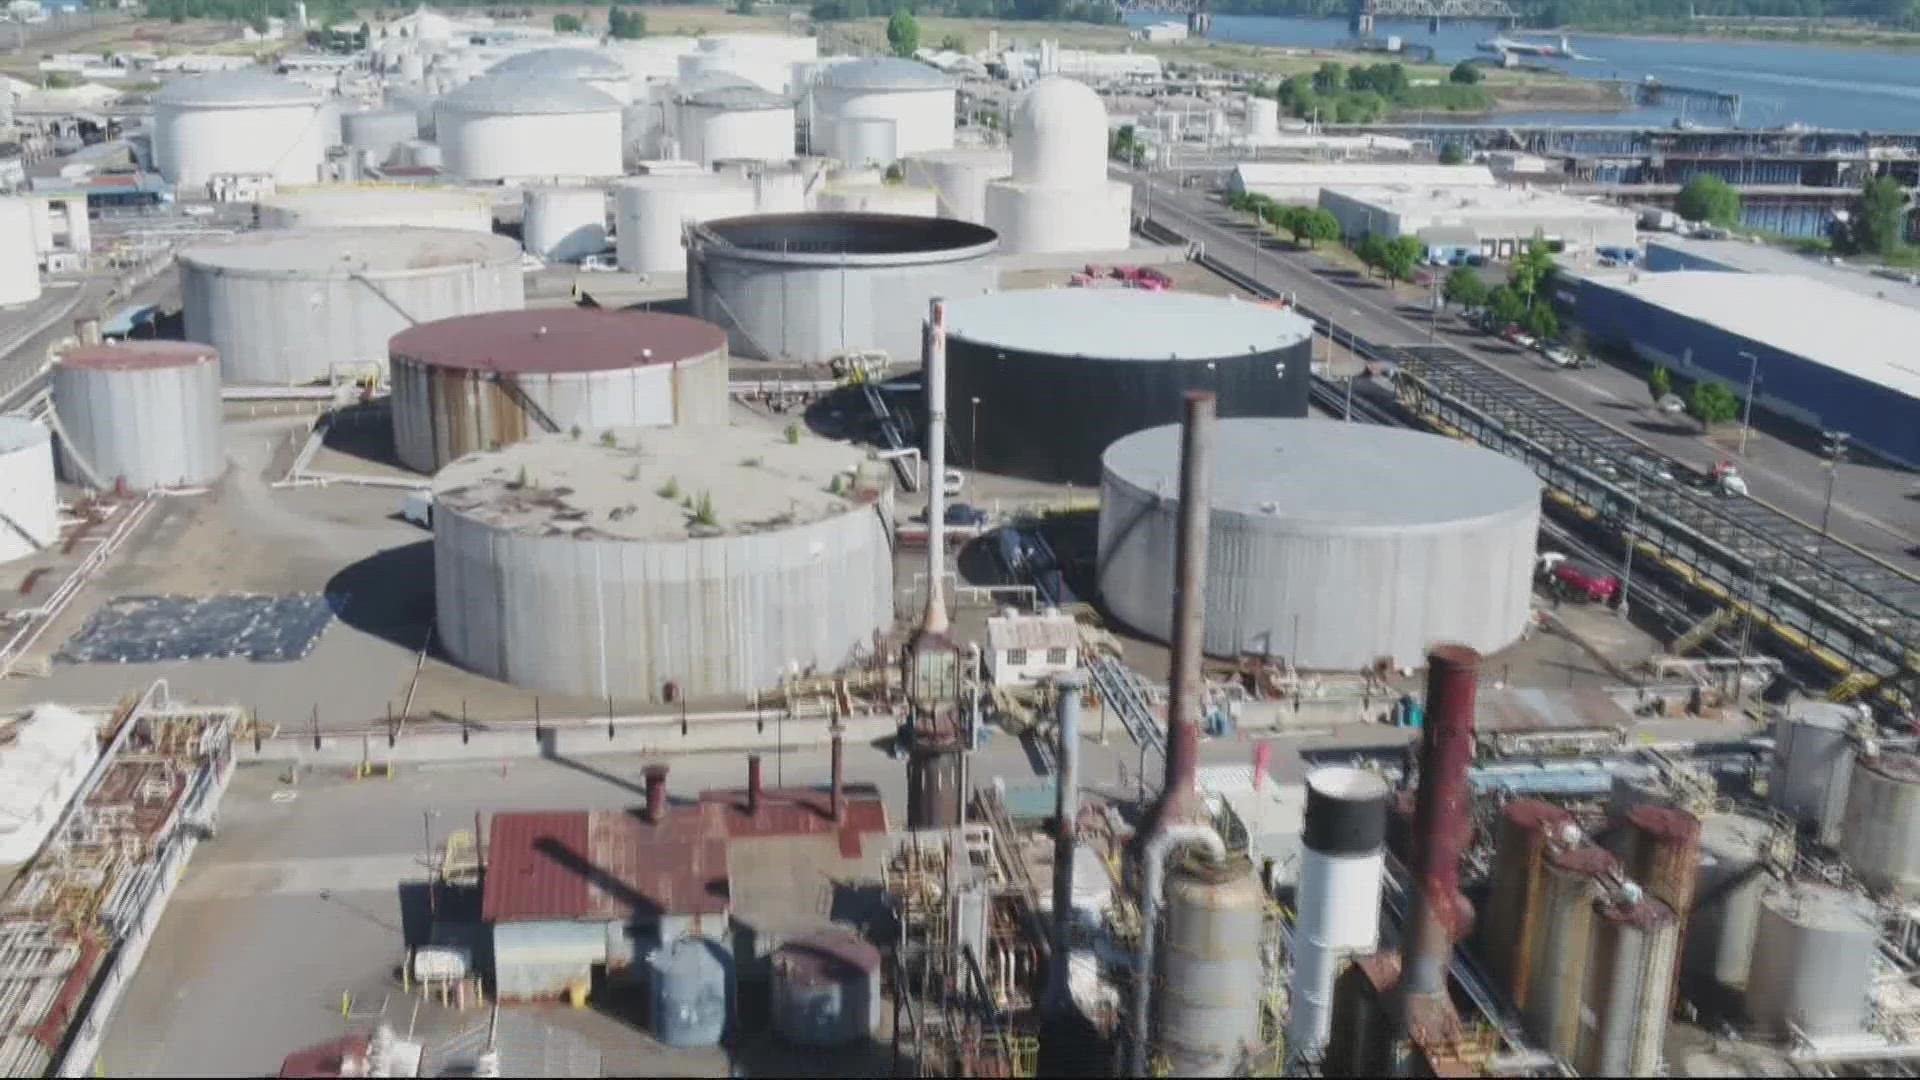 The city rejected the Texas-based company's expansion of a crude oil terminal in Northwest Portland over environmental health and safety concerns.